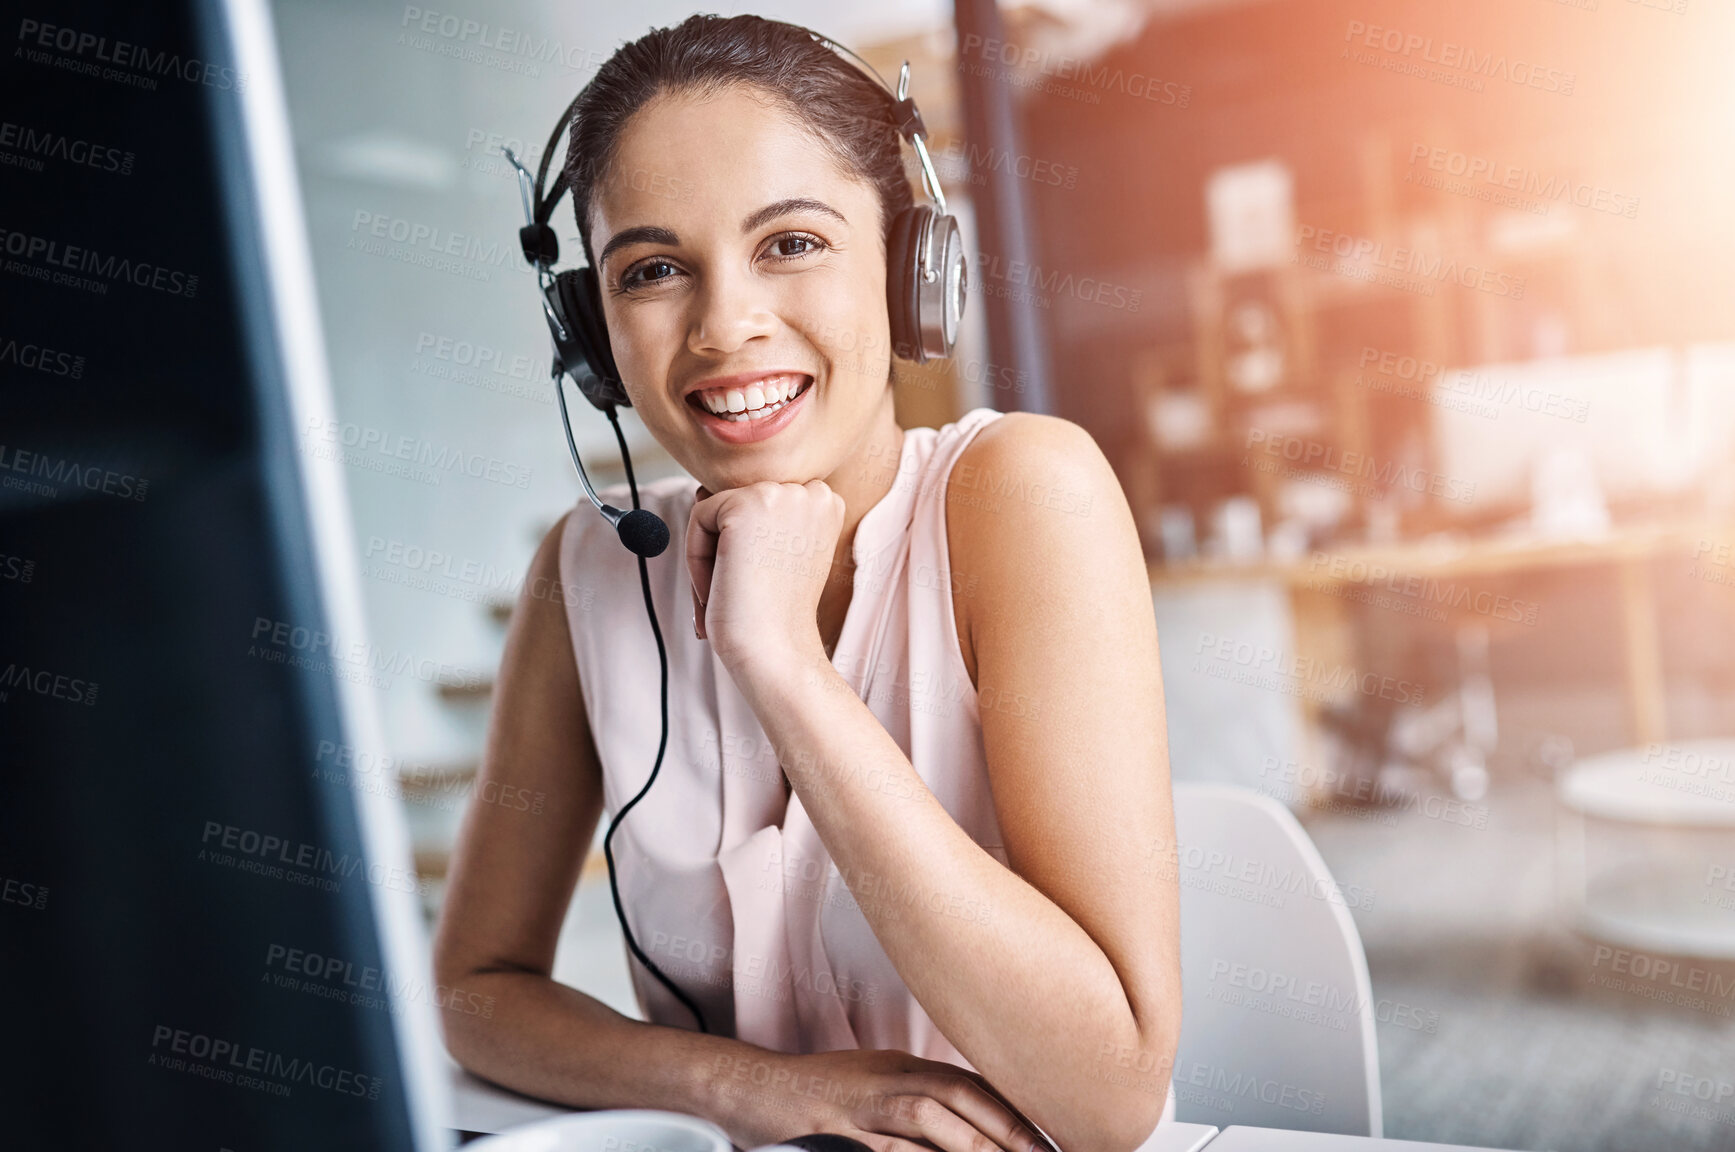 Buy stock photo Cropped portrait of an attractive young woman working in a call center